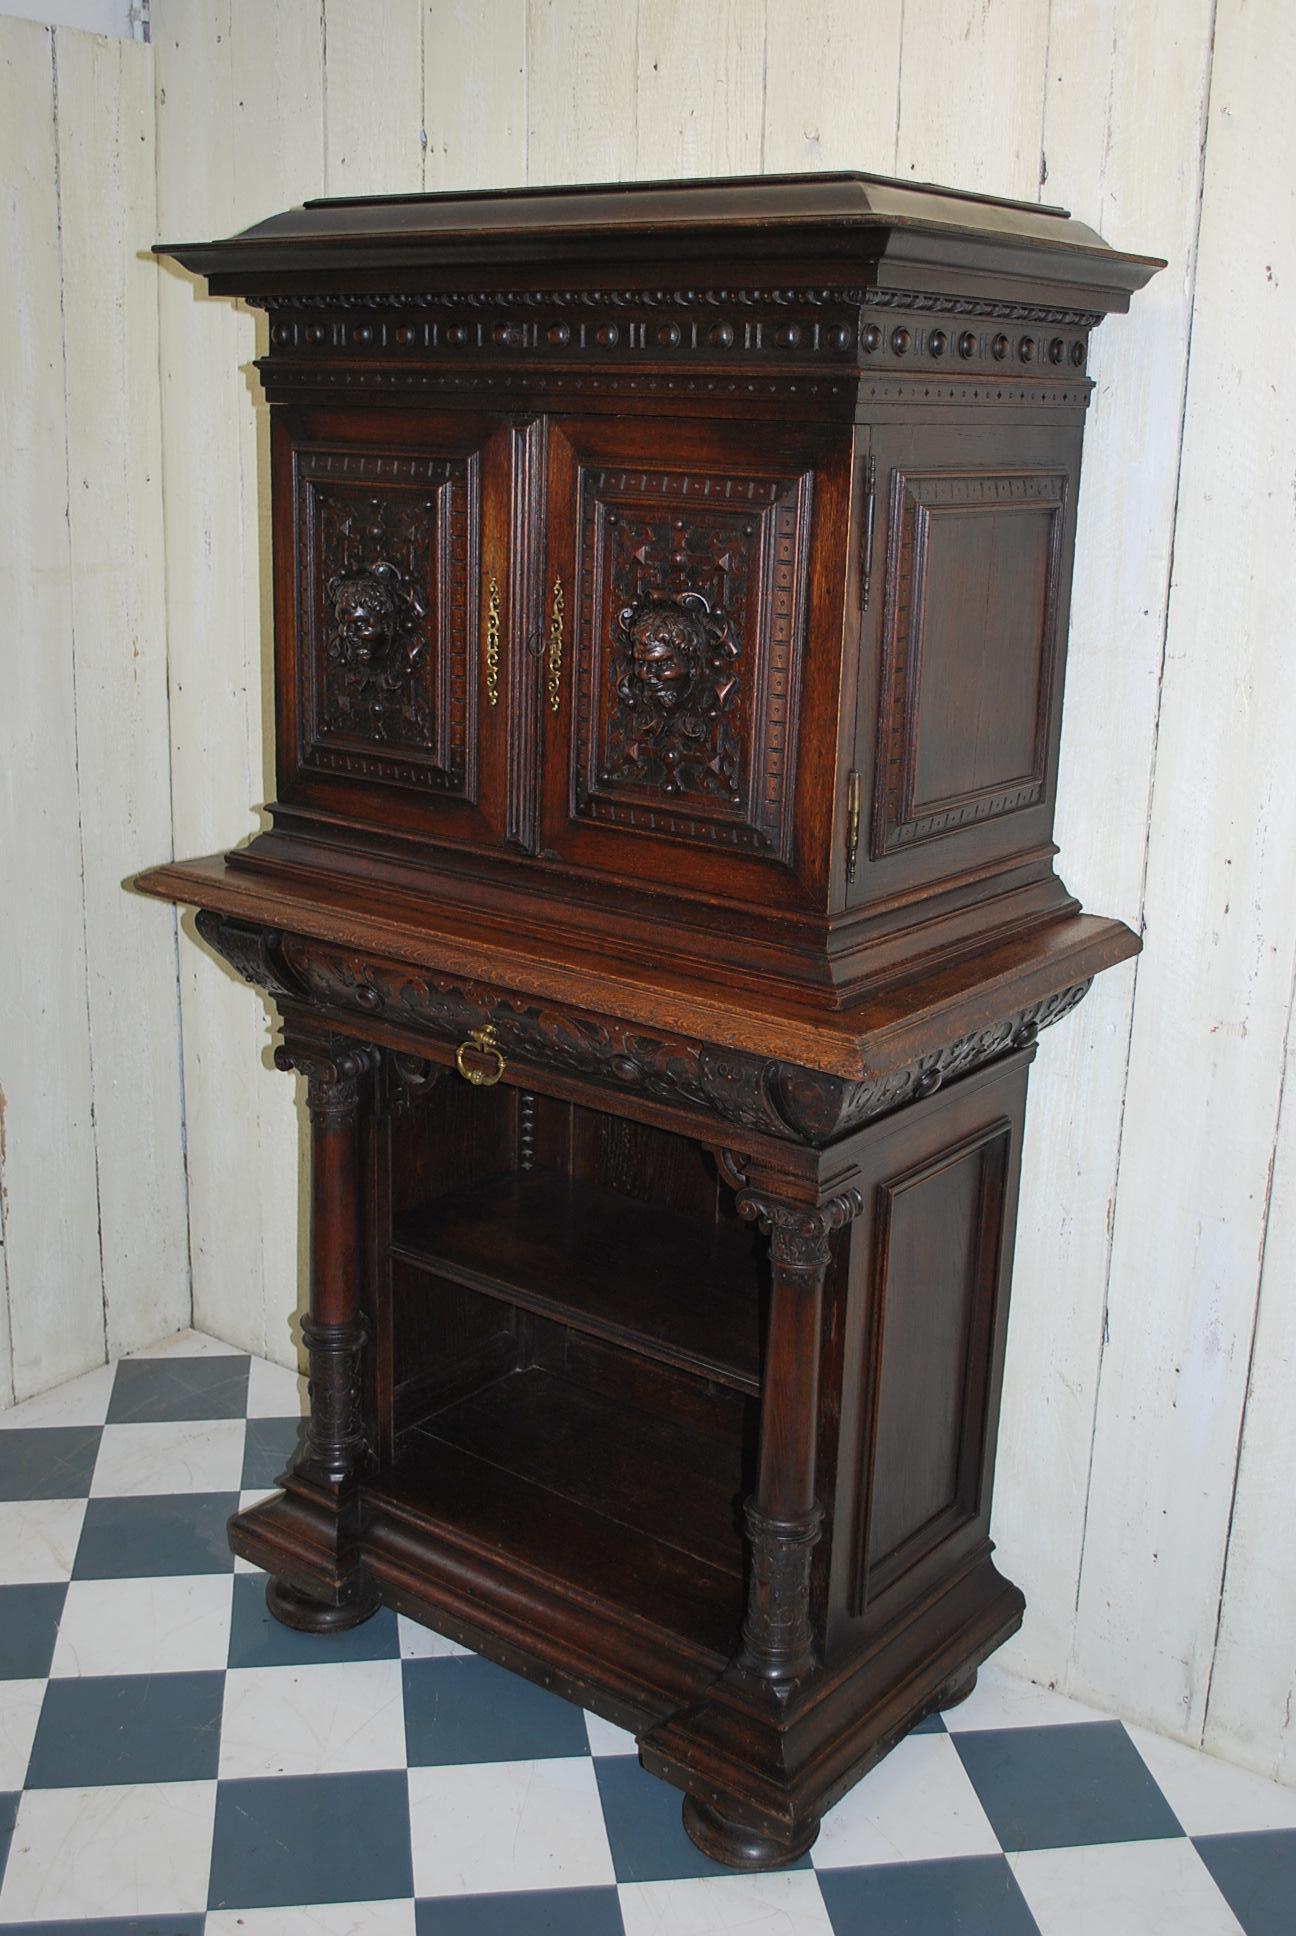 A very good quality Italian Renaissance Revival collectors cabinet on stand ,made in solid carved oak. The top section lifts off the base and has an adjustable shelf , the bottom section also has an adjustable shelf and a drawer in the cushion mold.